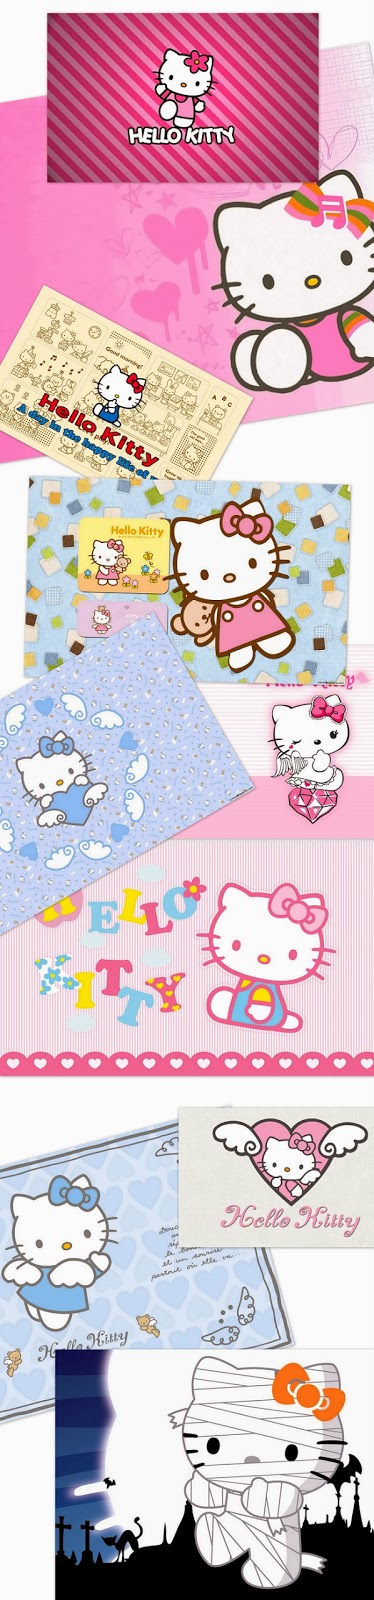 35+ Download Hello Kitty Themes Pictures